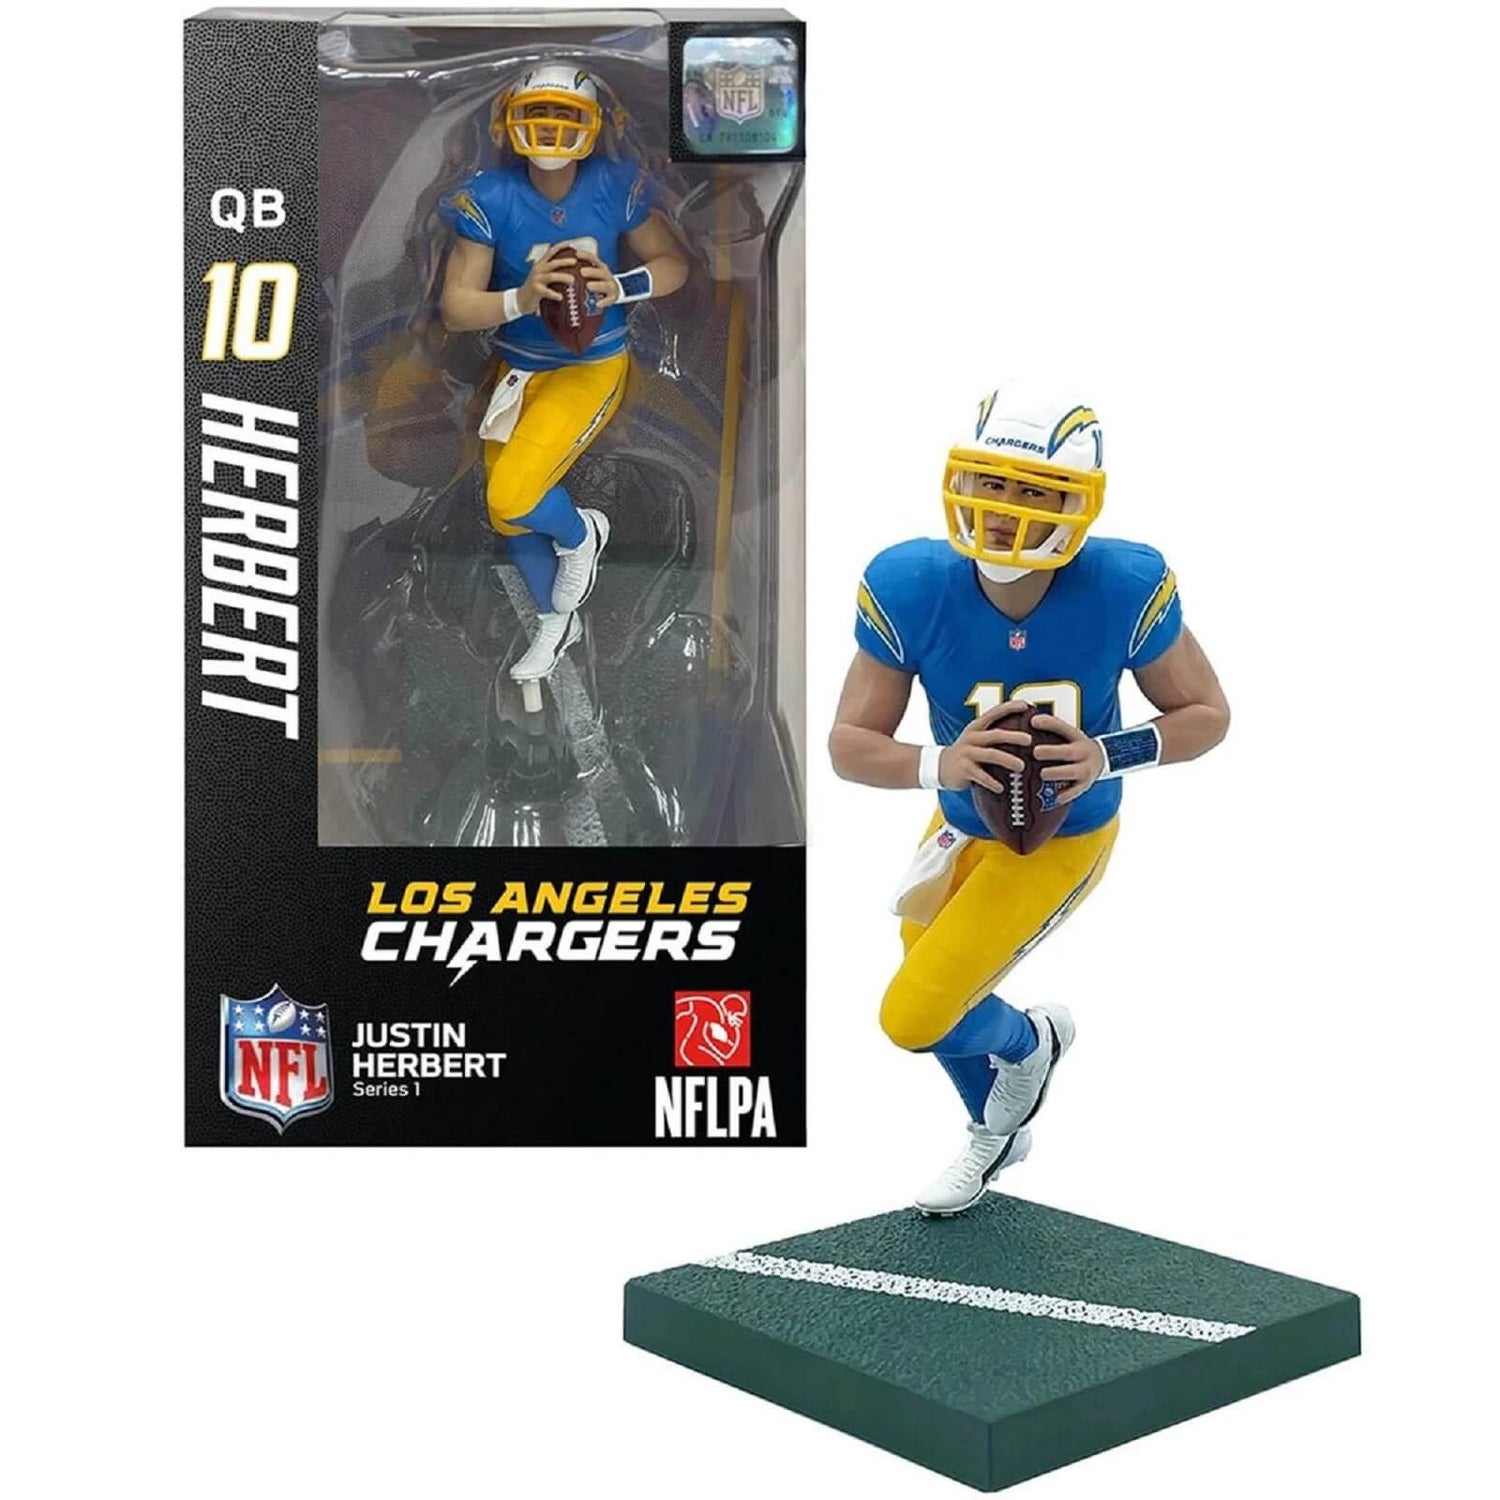 NFL Los Angeles Chargers 7" Action Figure - Justin Herbert